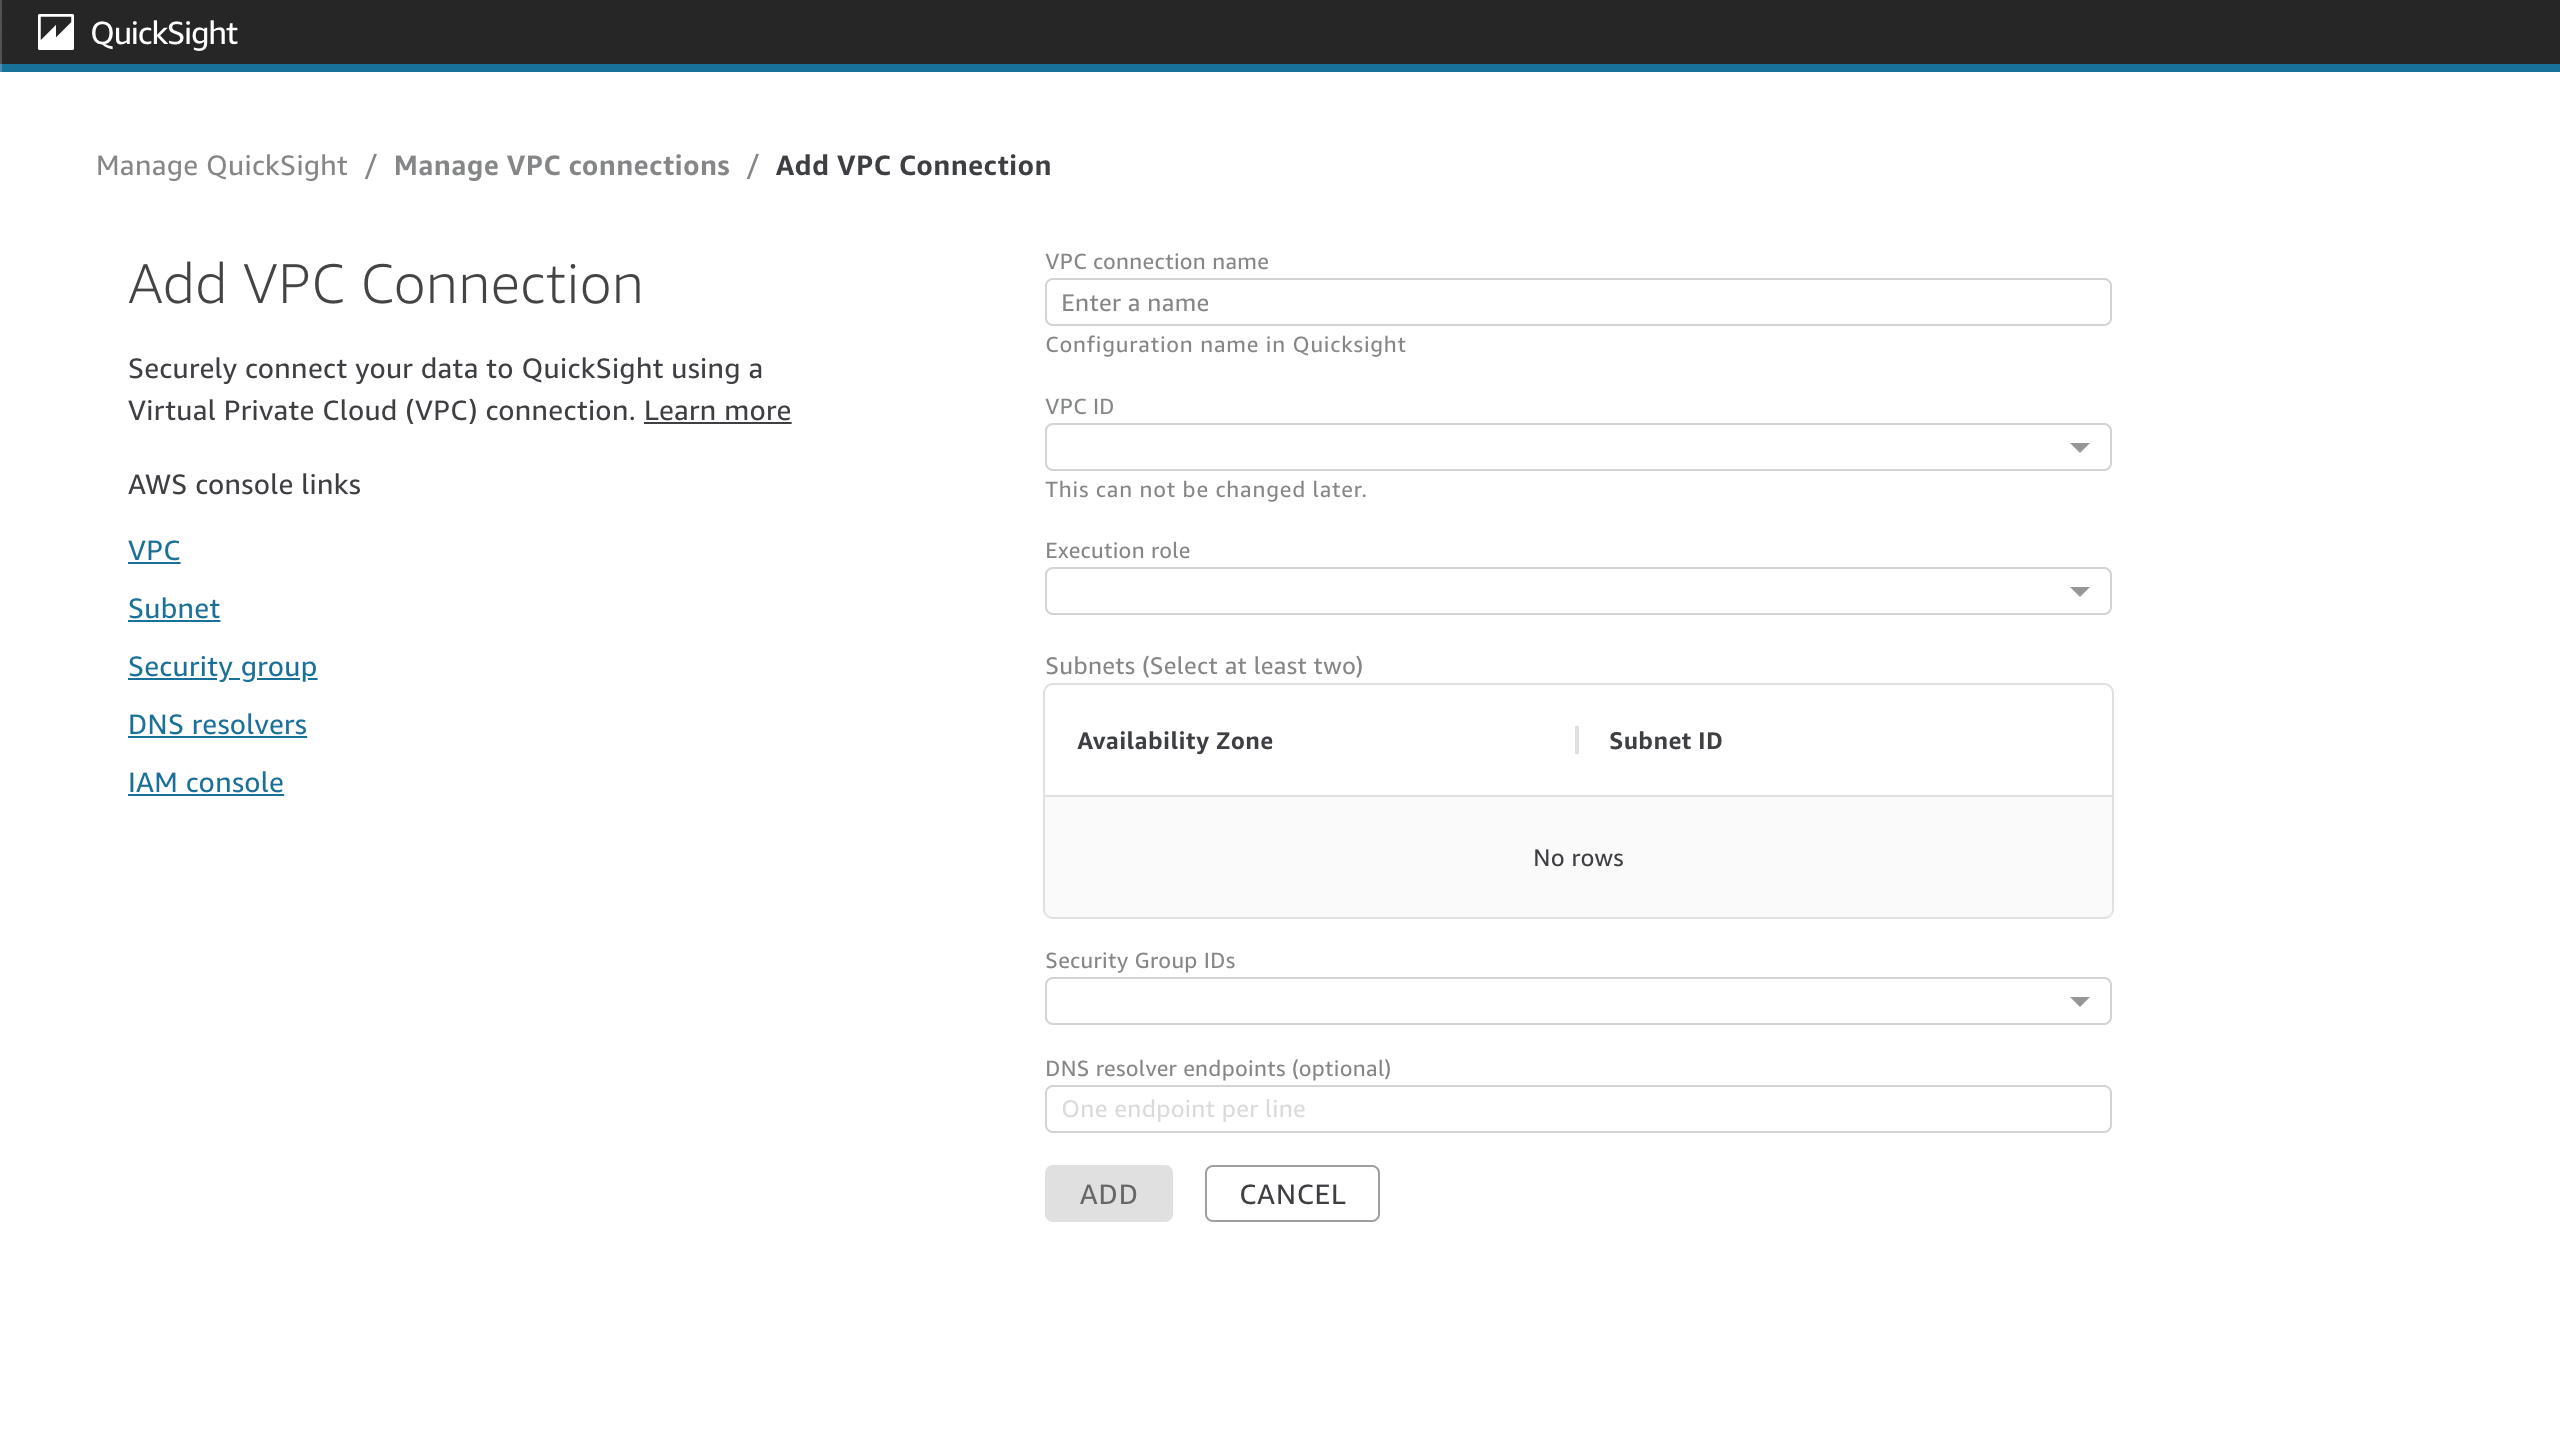 The Add VPC Connection window that you use to configure a new VPC connection to your QuickSight account.